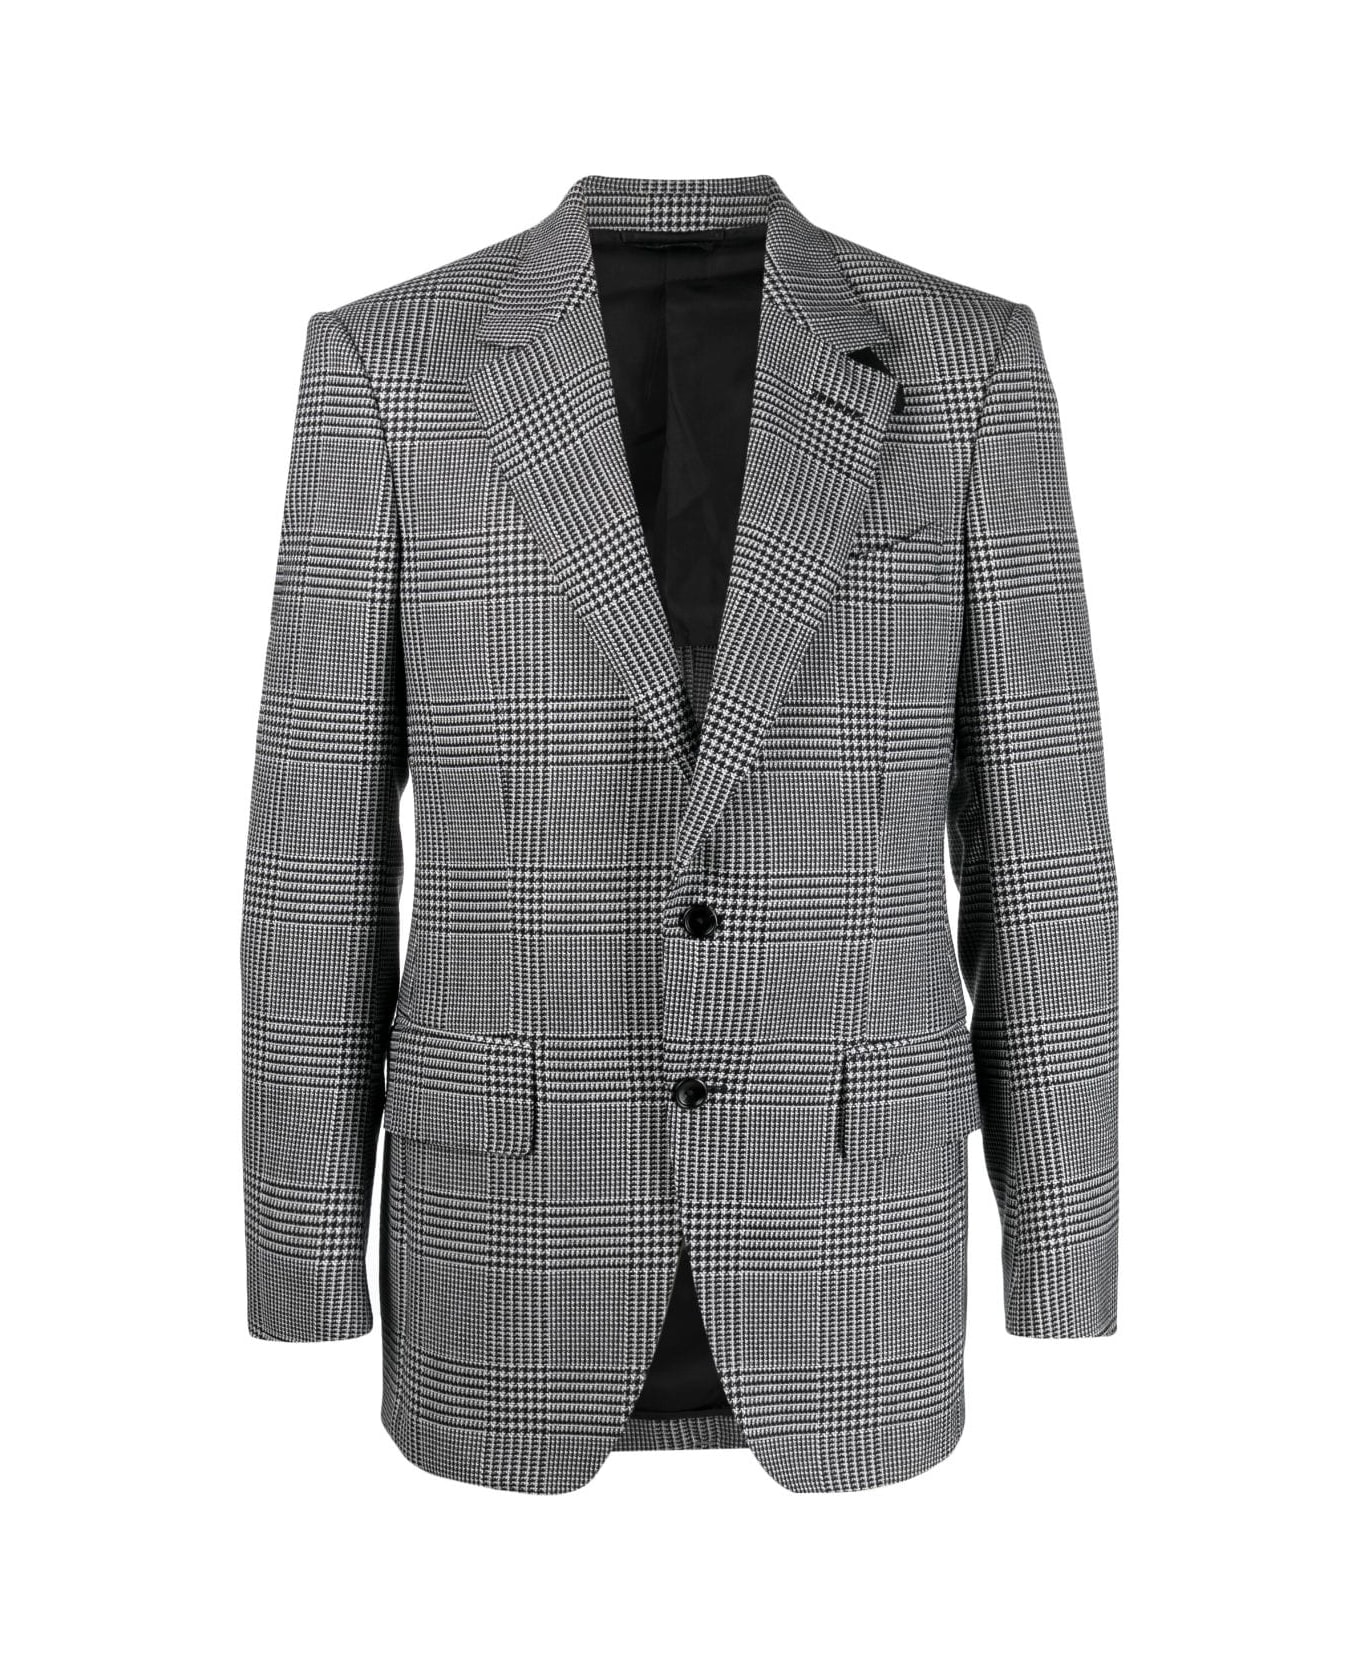 Tom Ford Single Breasted Jacket - Zlbaw Black White